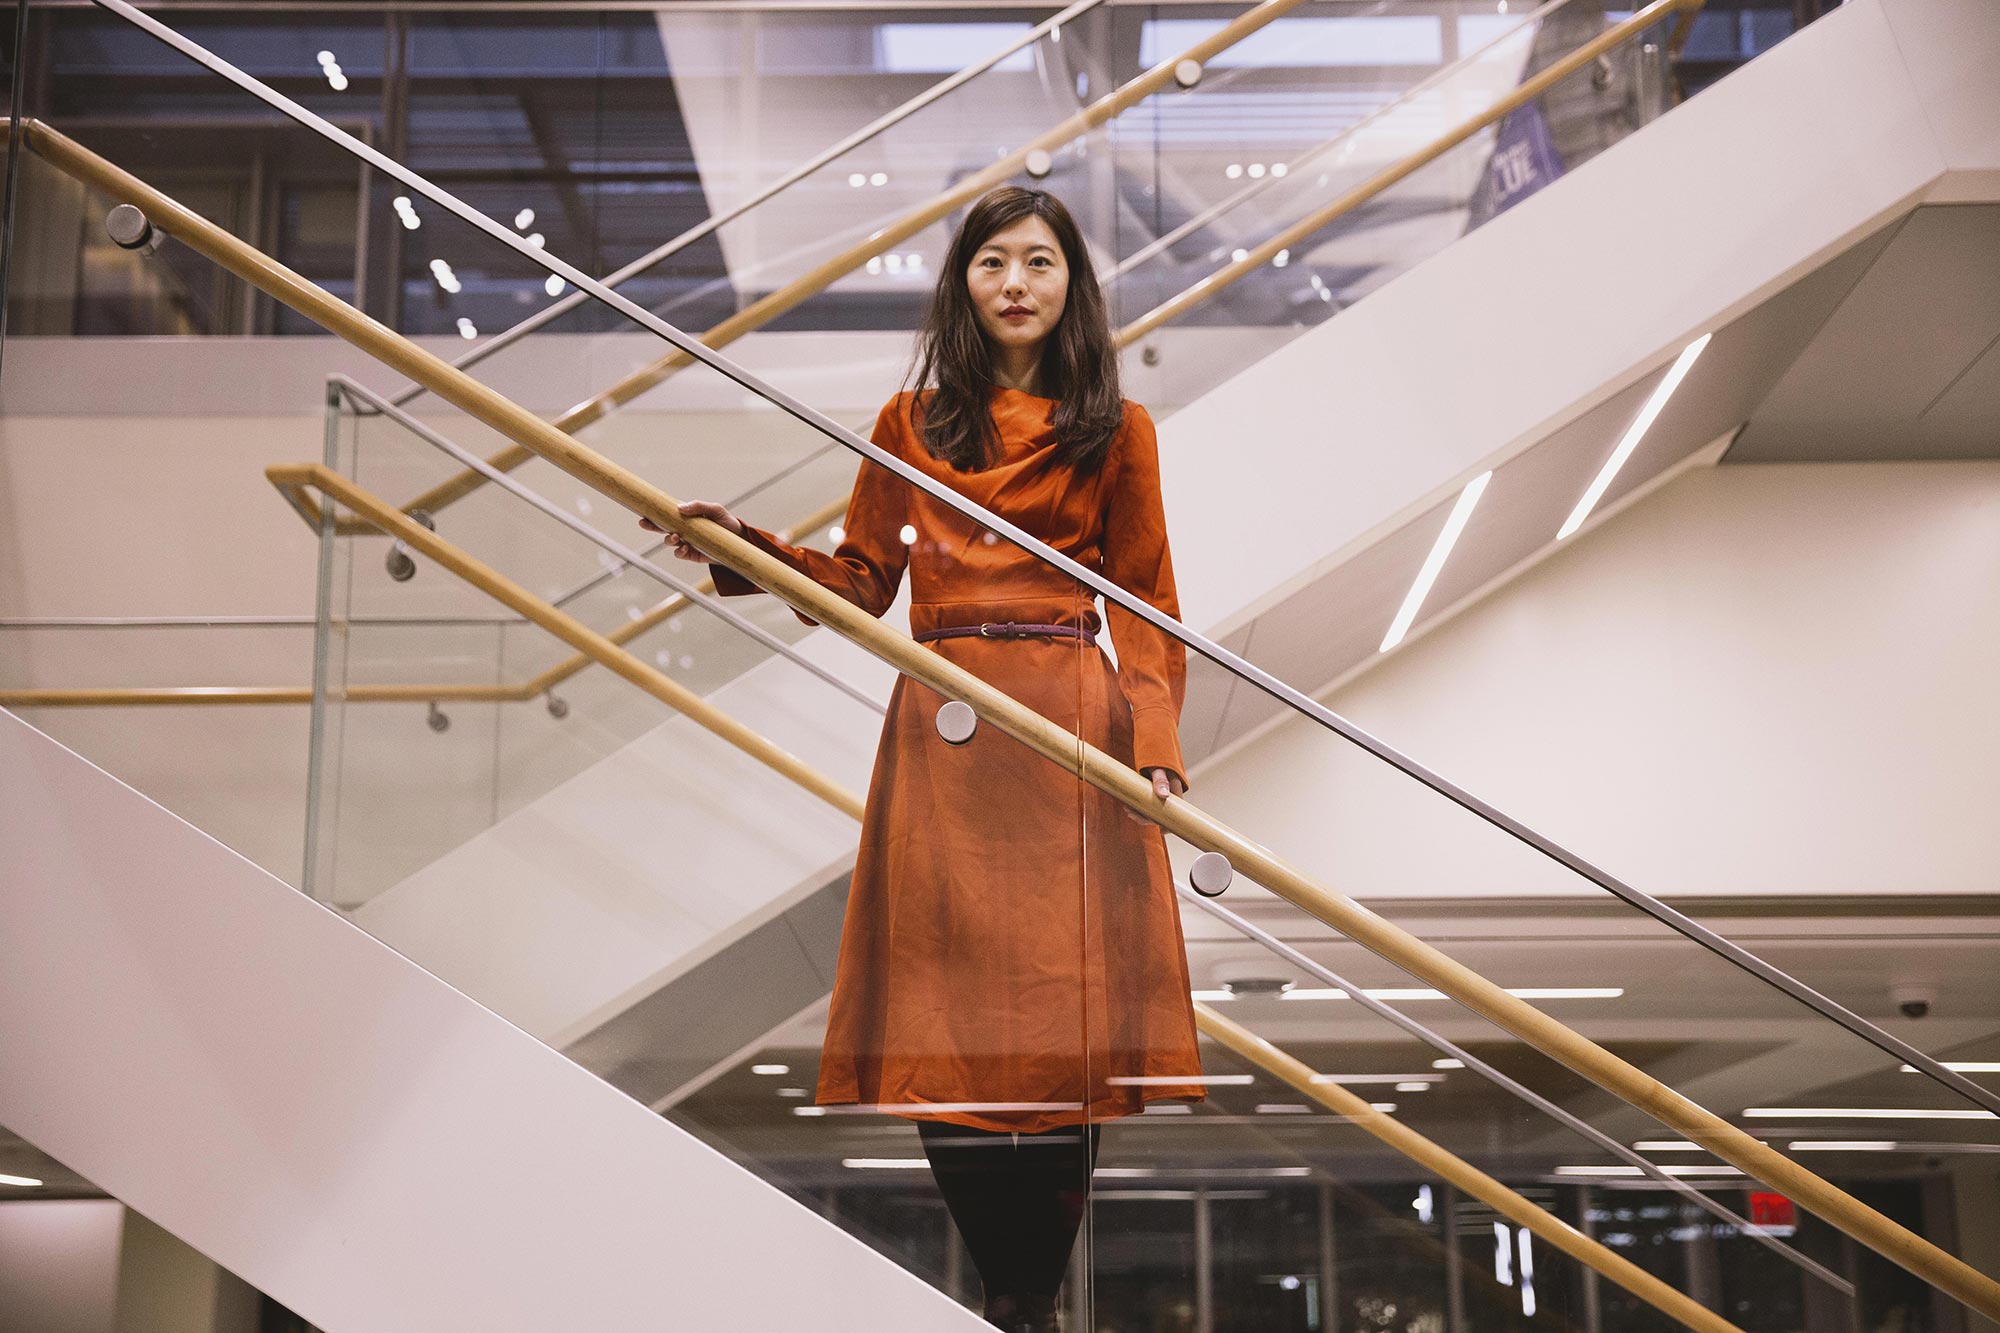 Biyu He in a red dress standing on an open stairwell.